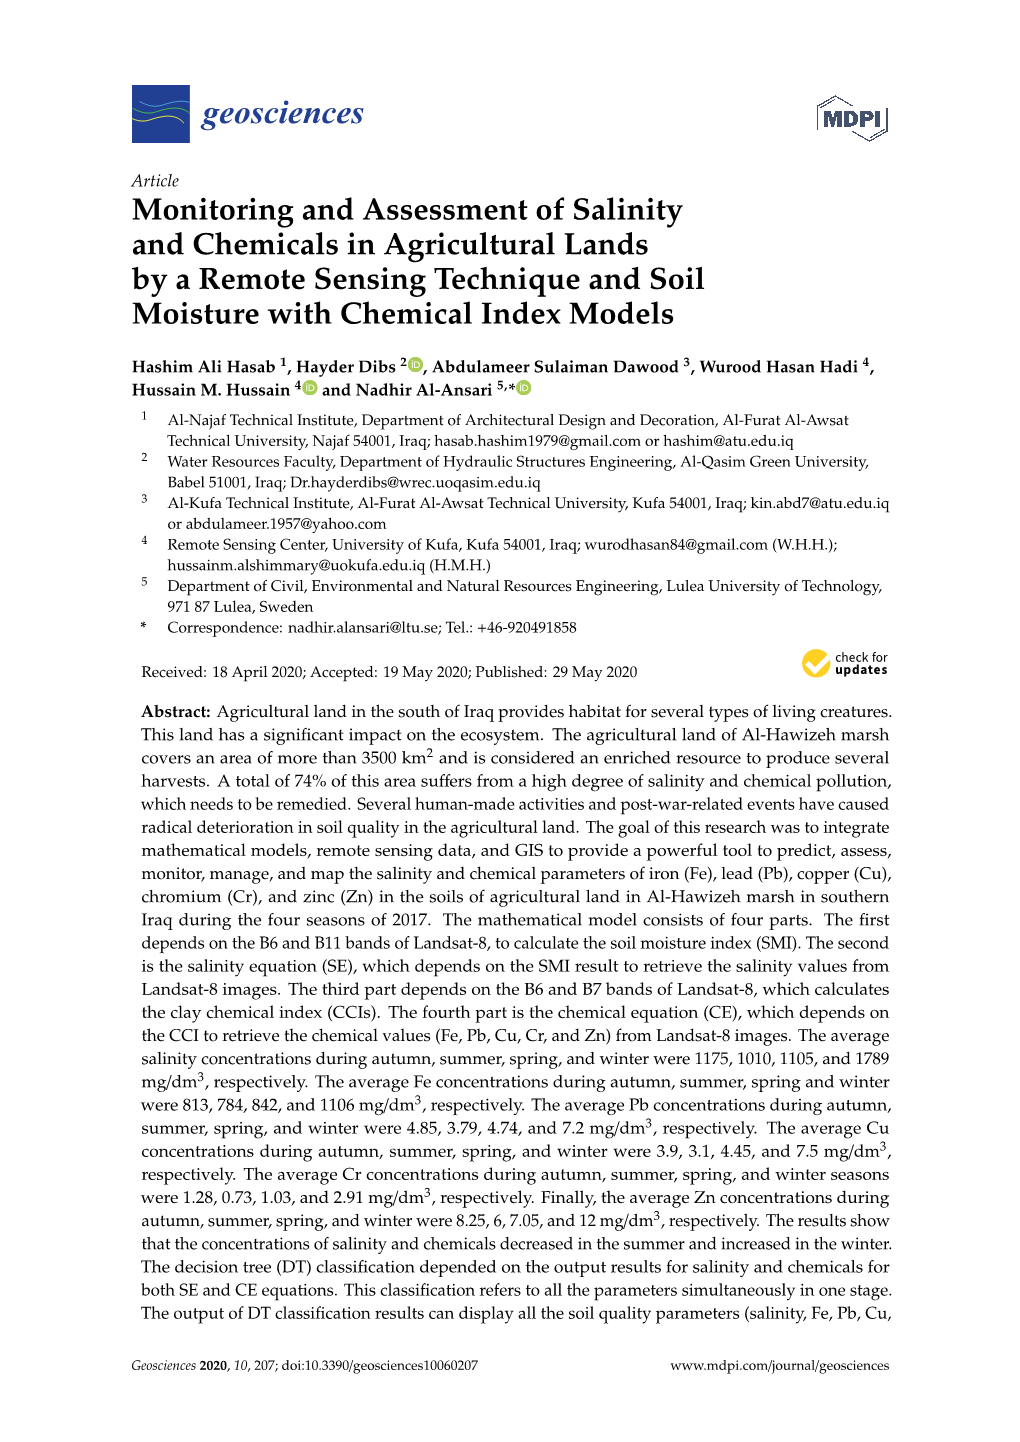 Monitoring and Assessment of Salinity and Chemicals in Agricultural Lands by a Remote Sensing Technique and Soil Moisture with Chemical Index Models